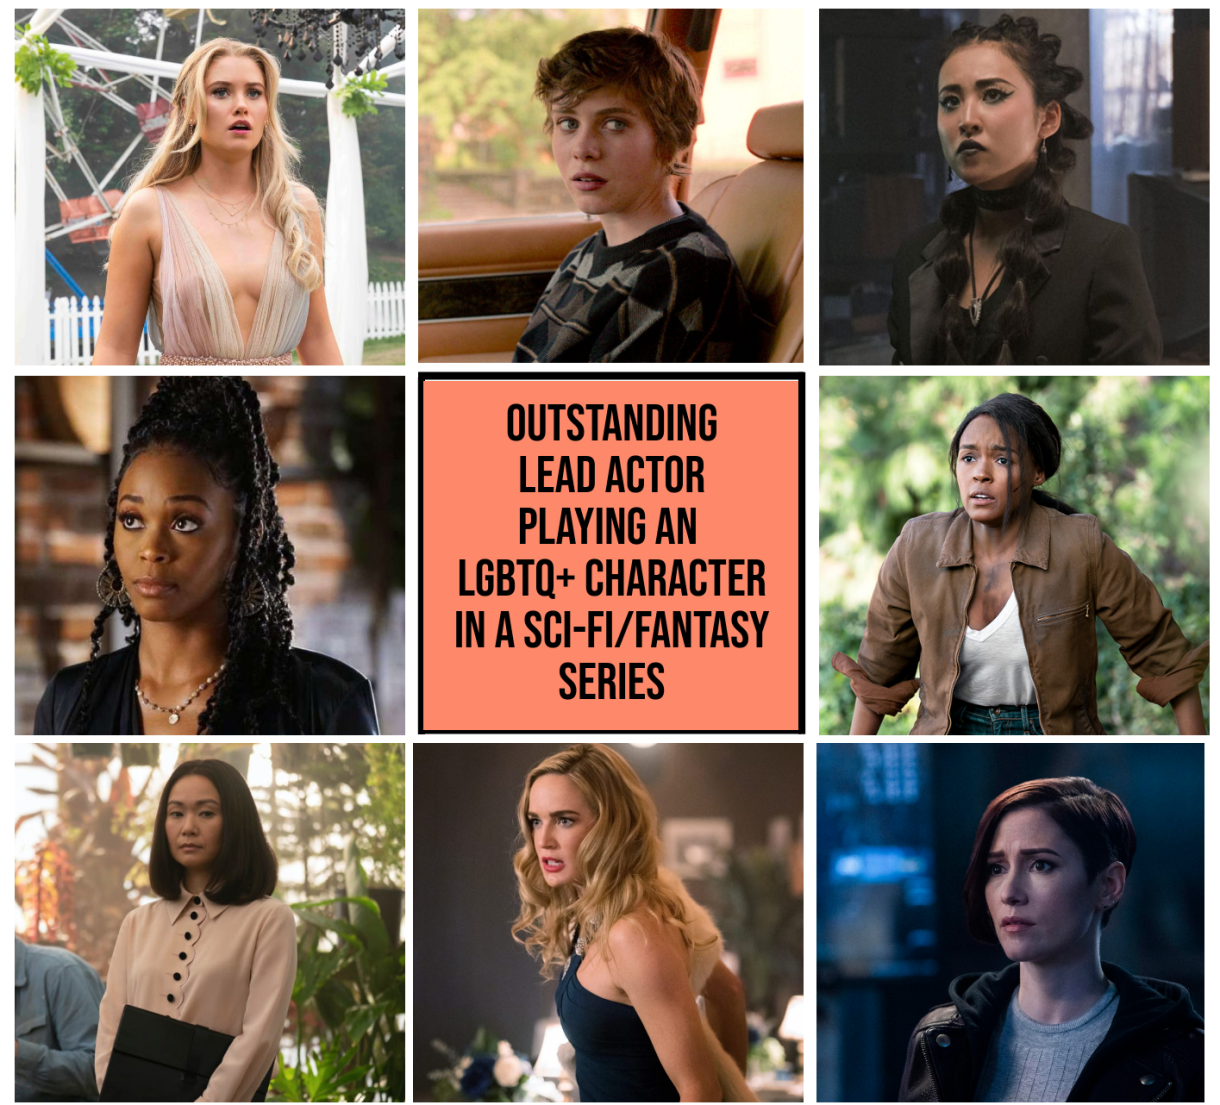 Top Row: Ginny Gardner as Karolina Dean, Marvel's Runaways (Hulu) // Sophia Lillis as Sydney Novak, I Am Not Okay With This (Netflix) // Lyrica Okano as Nico Minoru, Marvel's Runaways (Hulu)
Middle Row: Nafeesa Williams as Anissa, Black Lightning (The CW) // Orange Box reading "Outstanding Lead Actor Playing an LGBTQ+ Character in a Sci-Fi / Fantasy Series // Janelle Monae as Alex, Homecoming (Amazon Prime) 
Bottom Row: Hong Chau as Audrey Temple, Homecoming (Amazon Prime) // Caity Lotz as Sara Lance, Legends of Tomorrow (The CW) // Chyler Leigh as Alex Danvers, Supergirl (The CW)